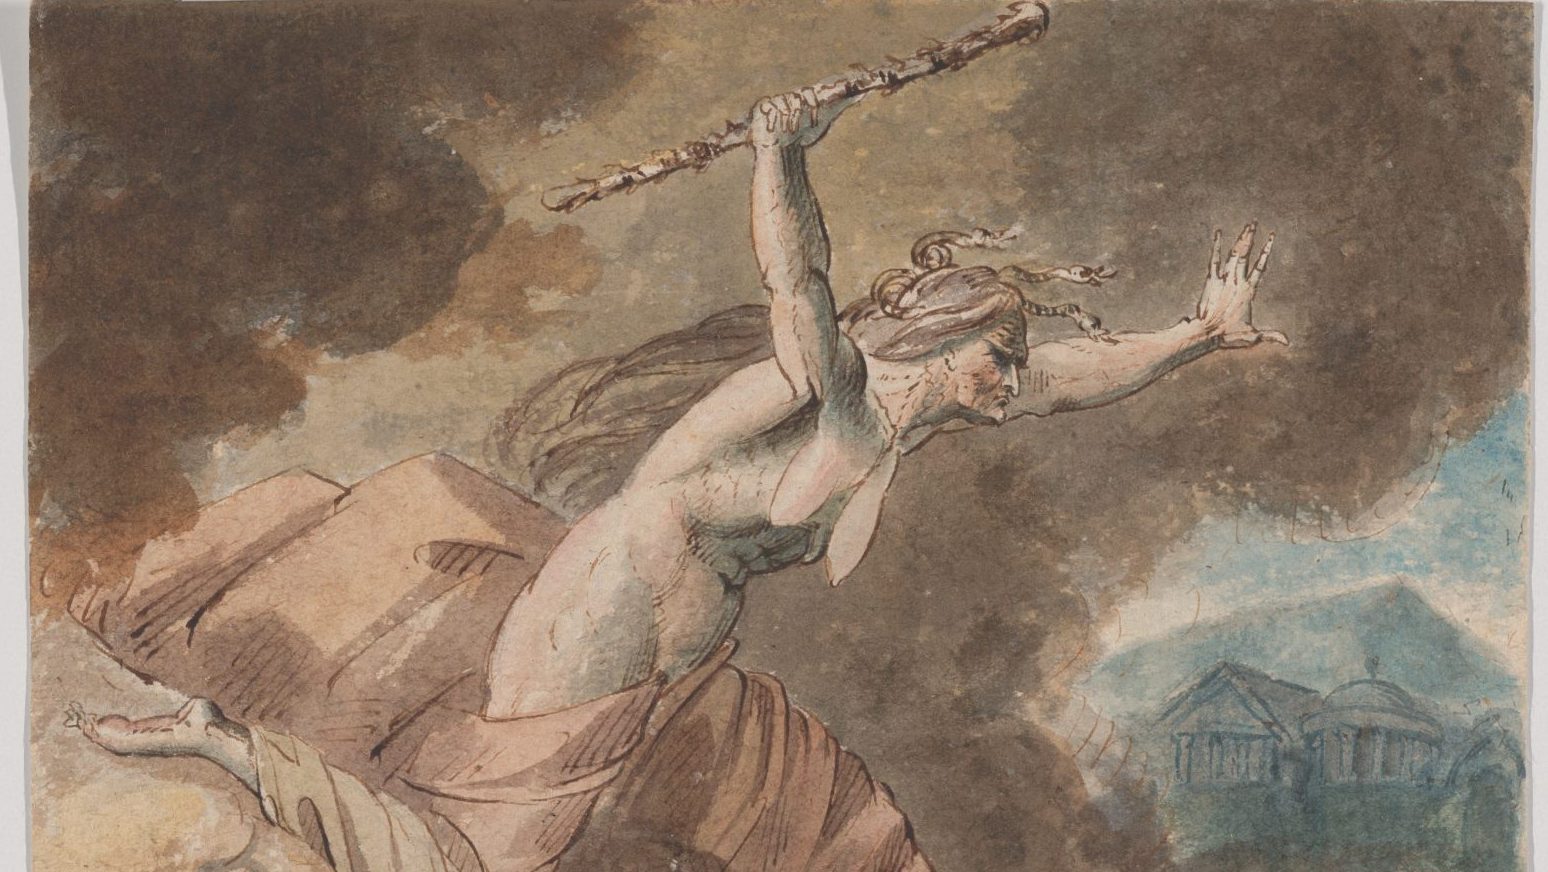 A drawing which shows envy as a naked hag angrily soaring through the sky, by William Hamilton